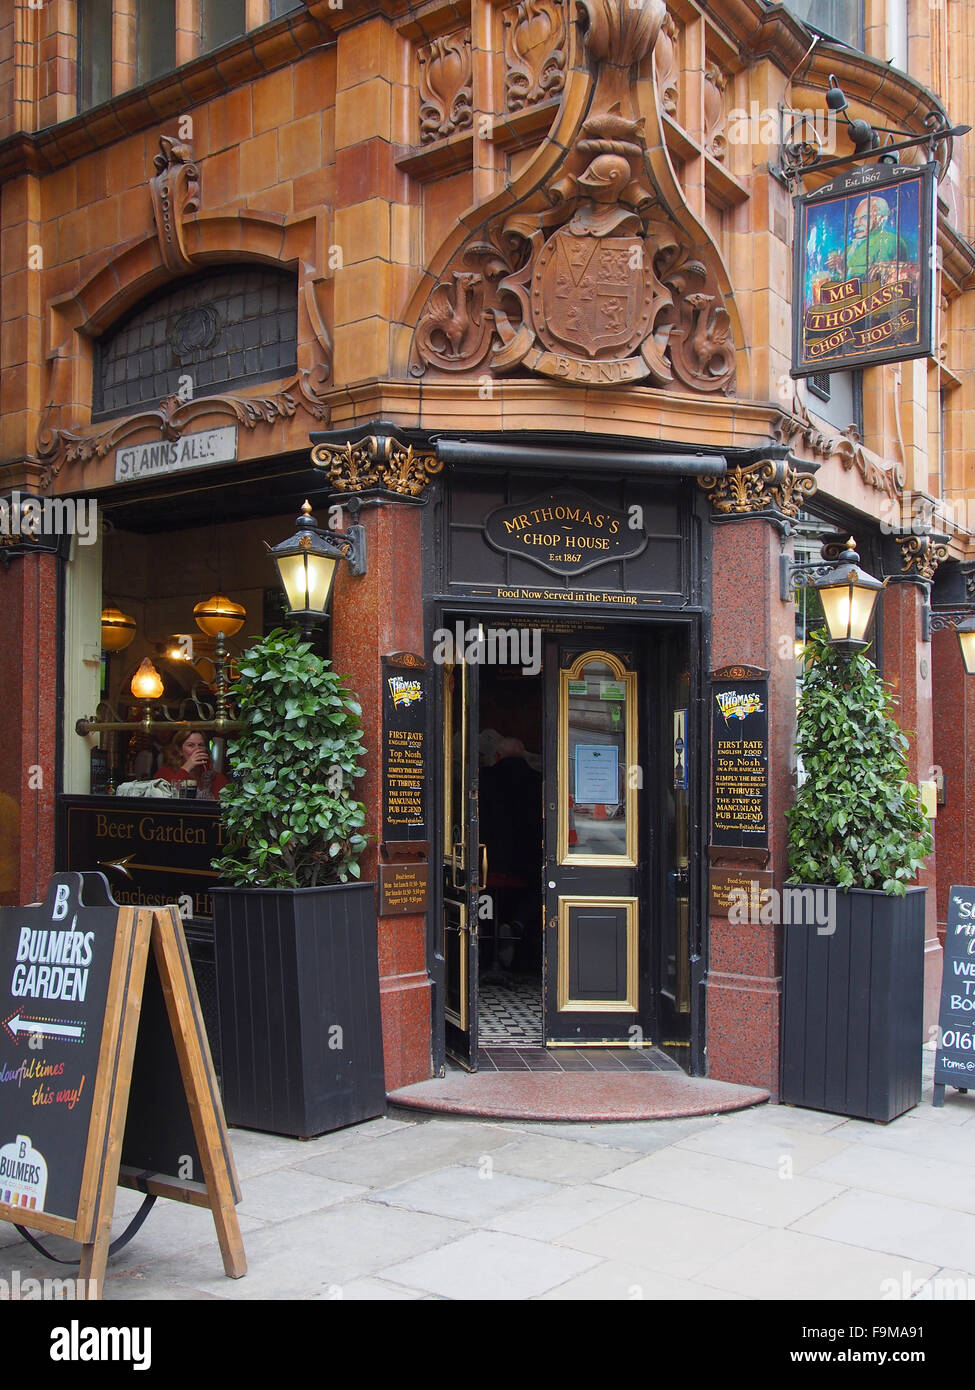 Mr. Thomas's Chop House, a public house first established in 1867, in Manchester city centre, UK. Stock Photo